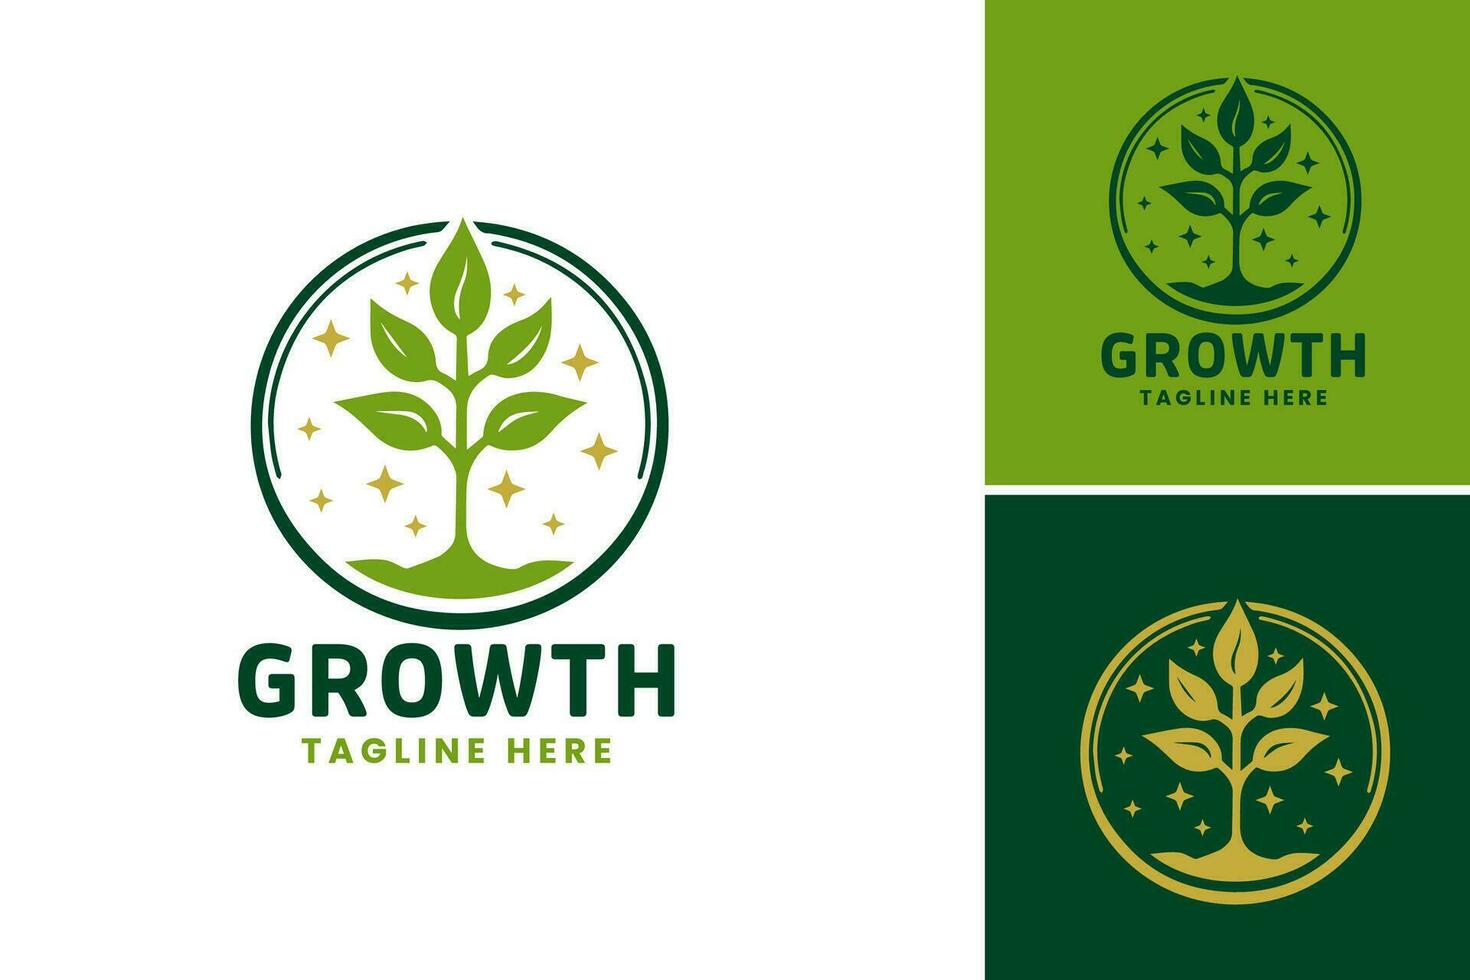 growth logo template is a design asset suitable for businesses or organizations that want to convey growth, progress, or development in their branding. vector